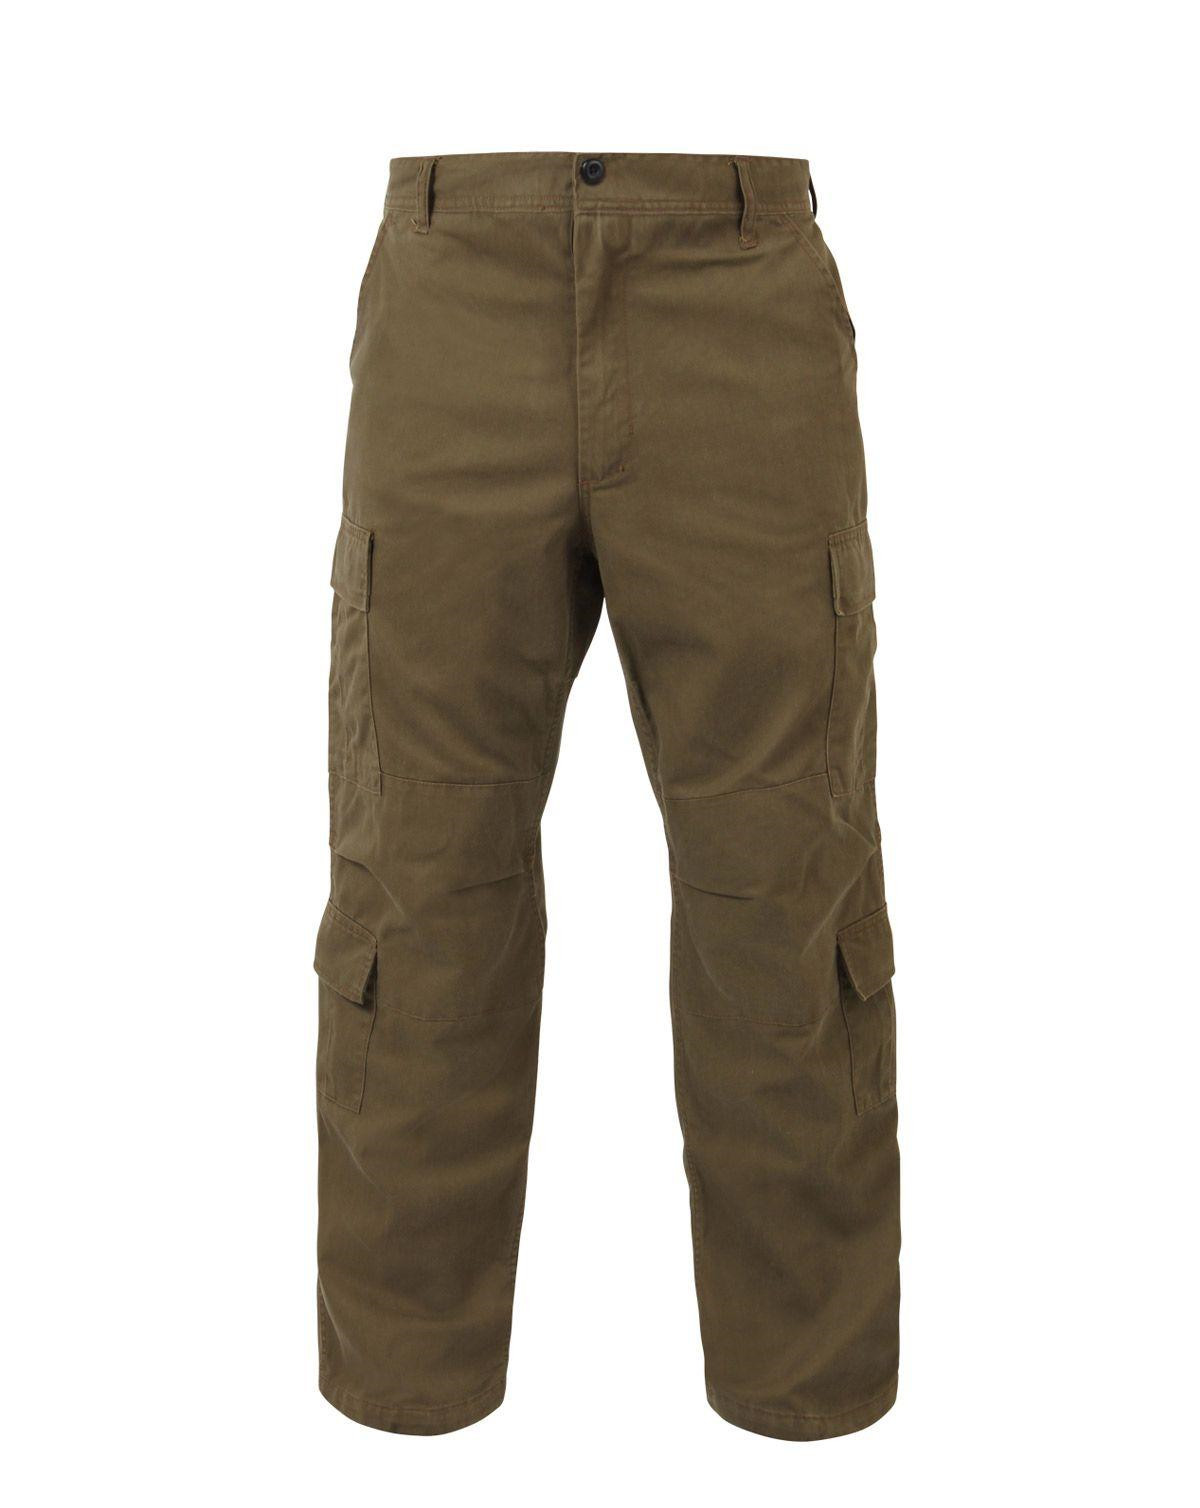 Rothco Paratrooper Bukser (Russet Brown, 2XL)